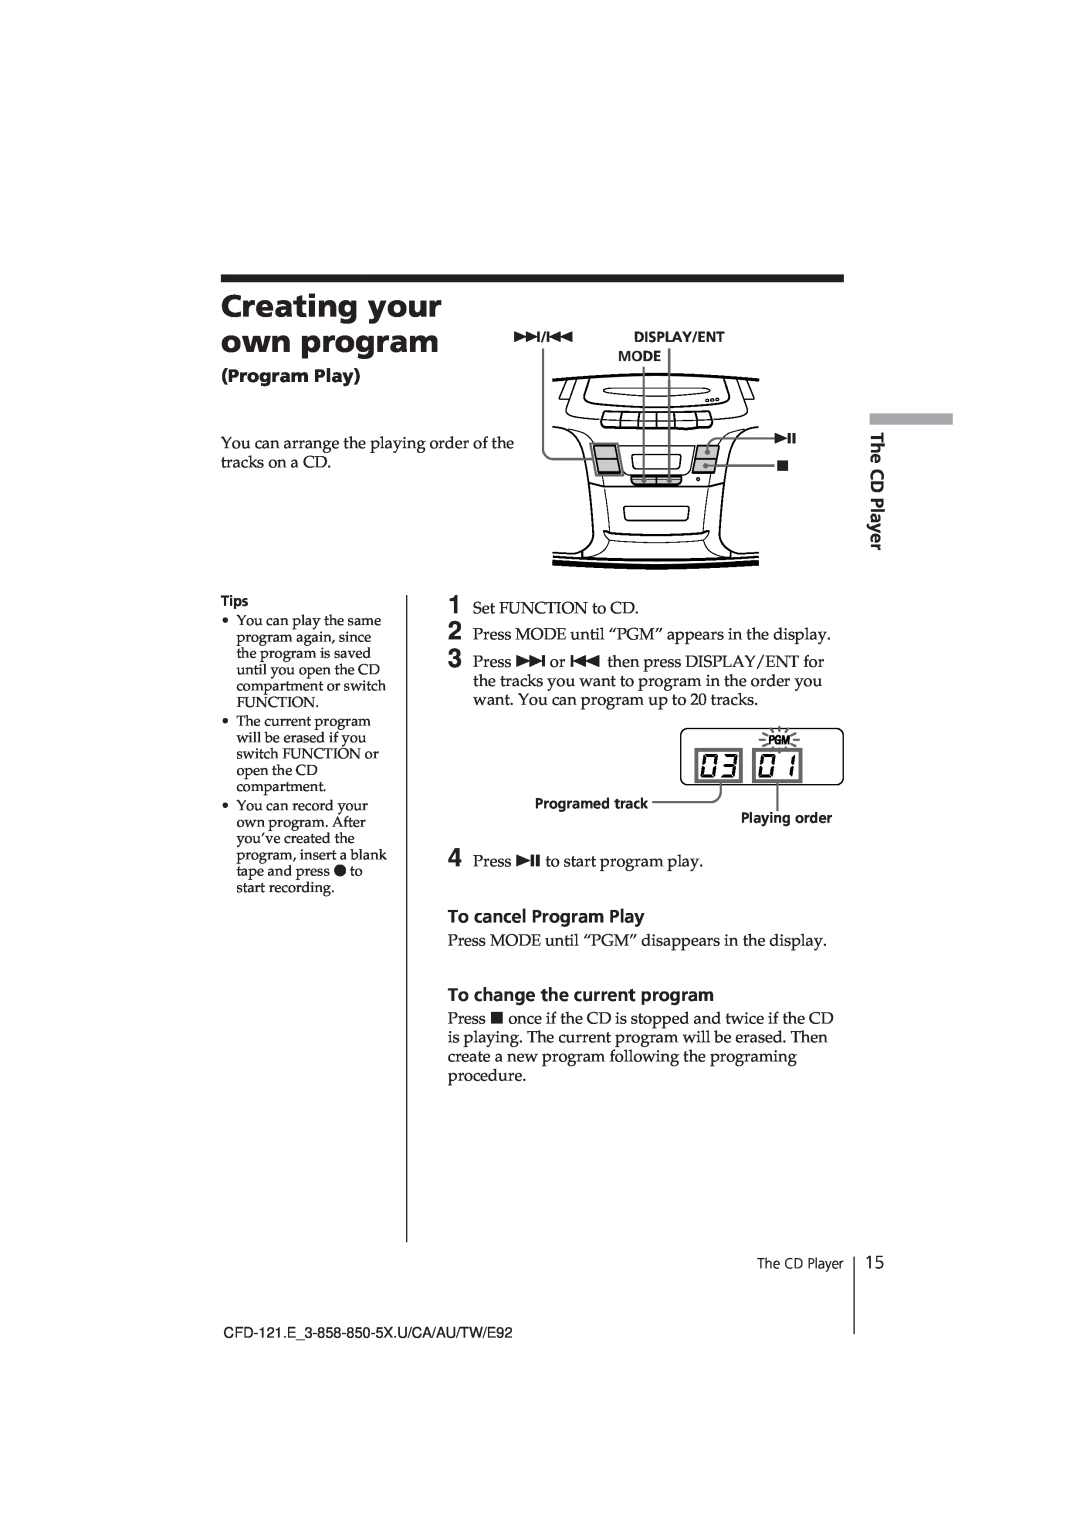 Sony CFD-121 manual Creating your, own program, To cancel Program Play, To change the current program, The CD Player 